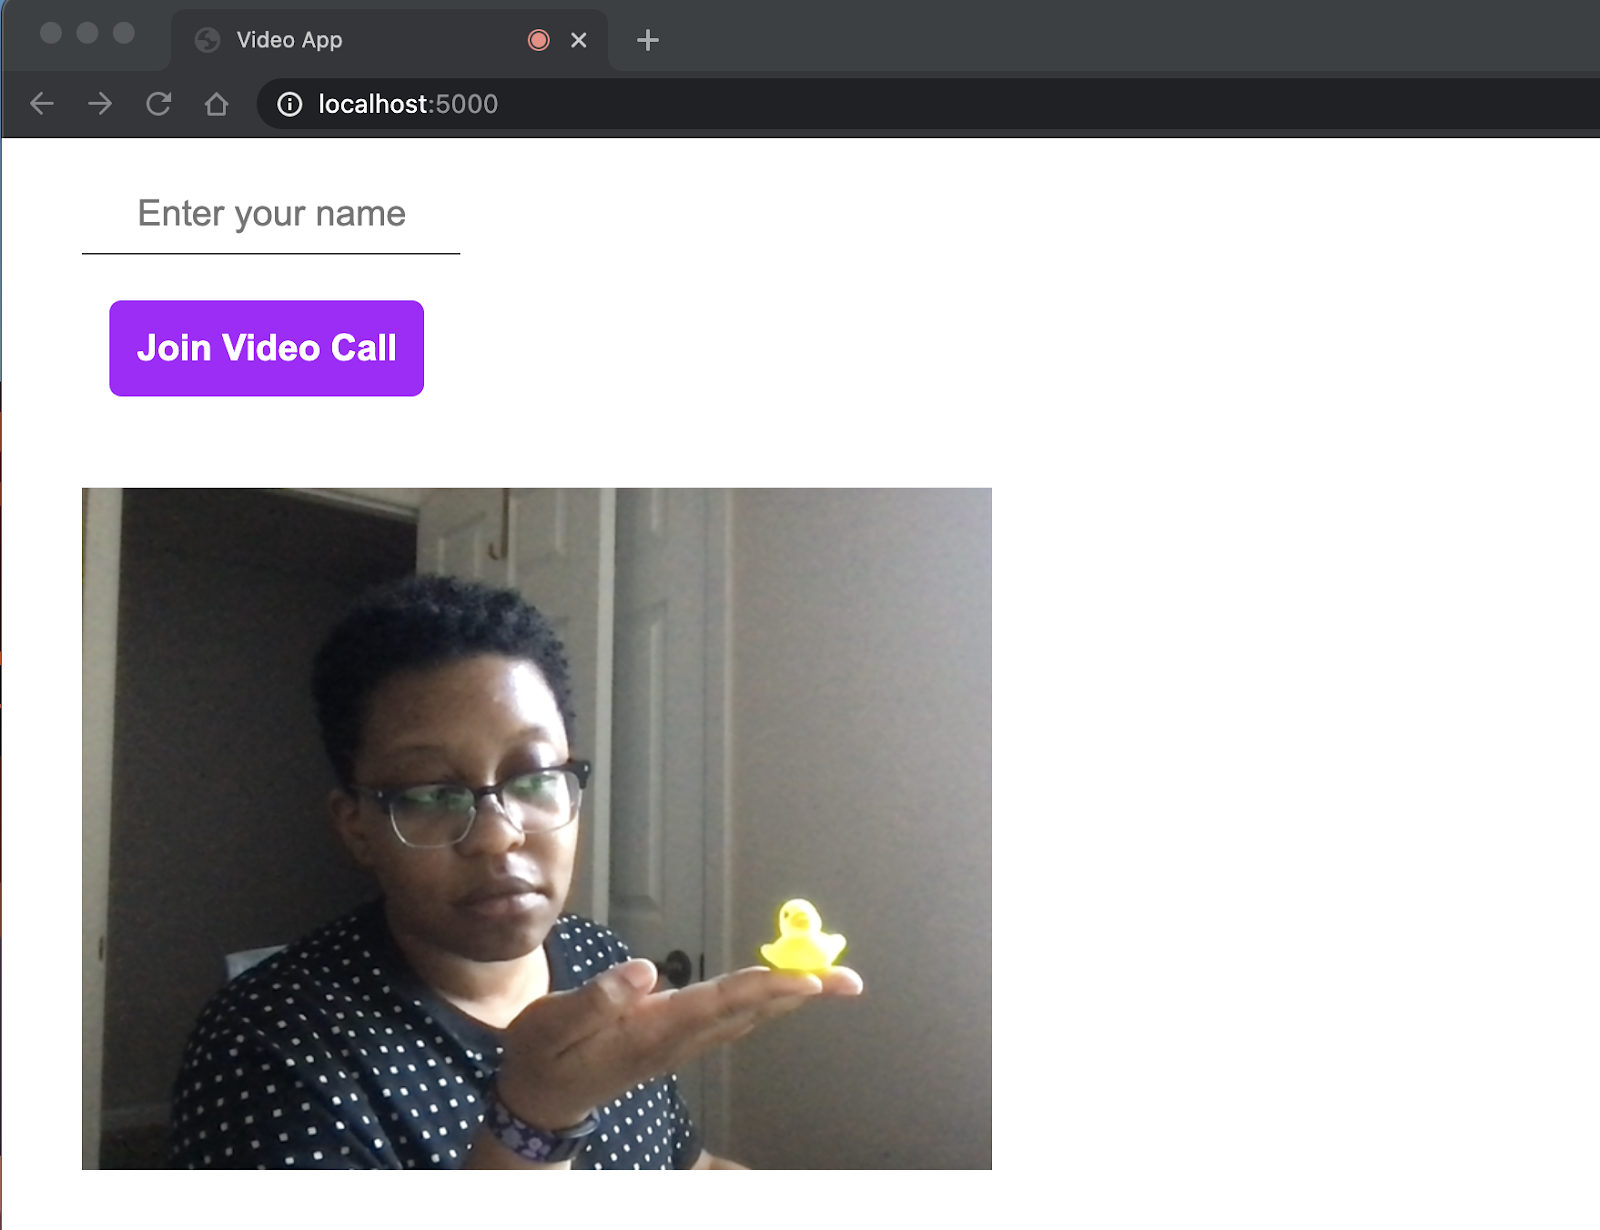 Under the "Join Video Call" button appears the author&#x27;s video feed. They are holding a tiny rubber duck.